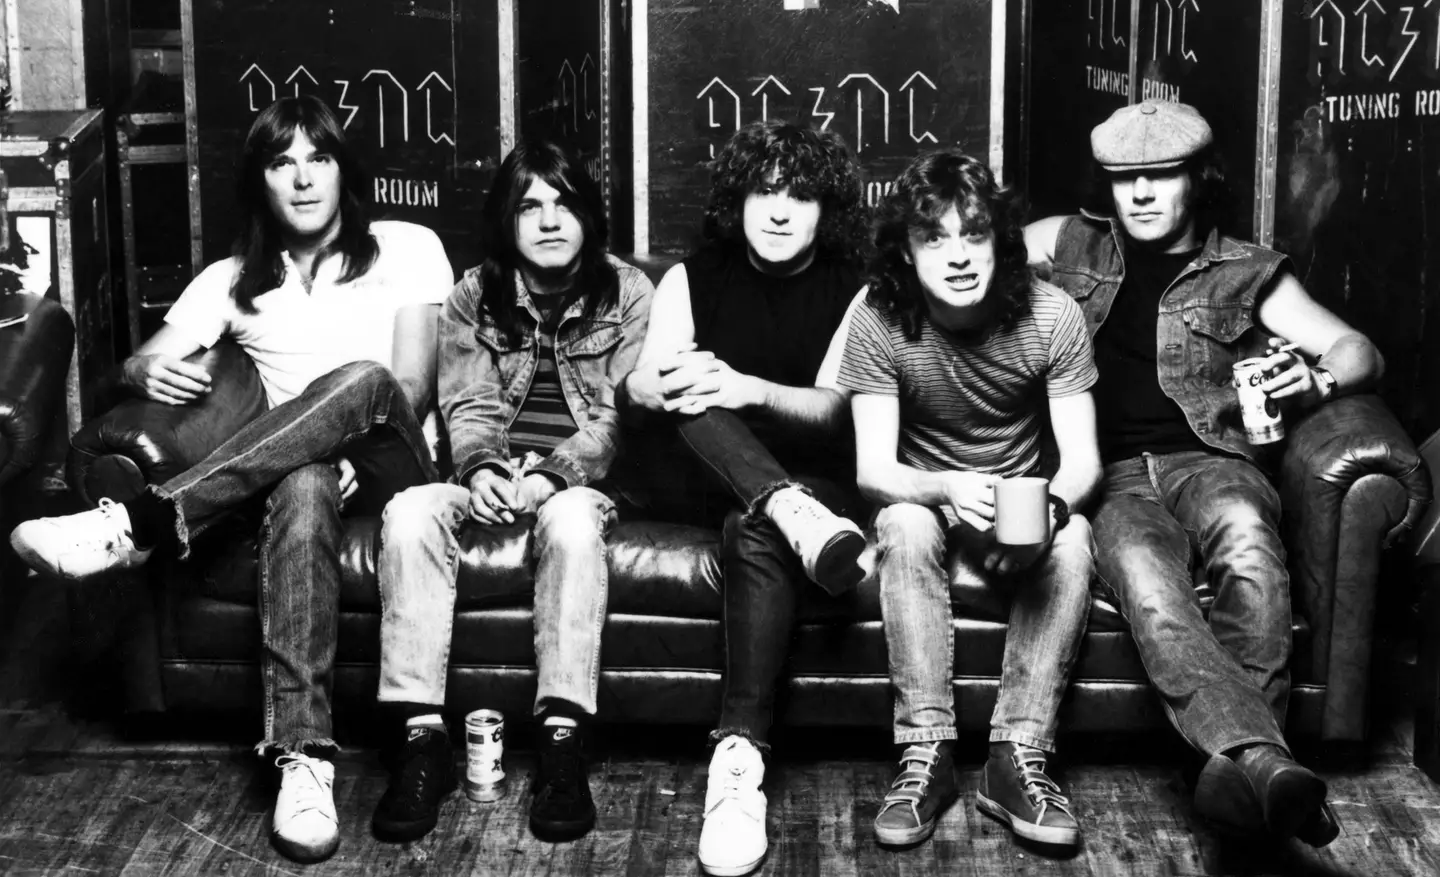 Several AC/DC songs weren't allowed to be played on air.